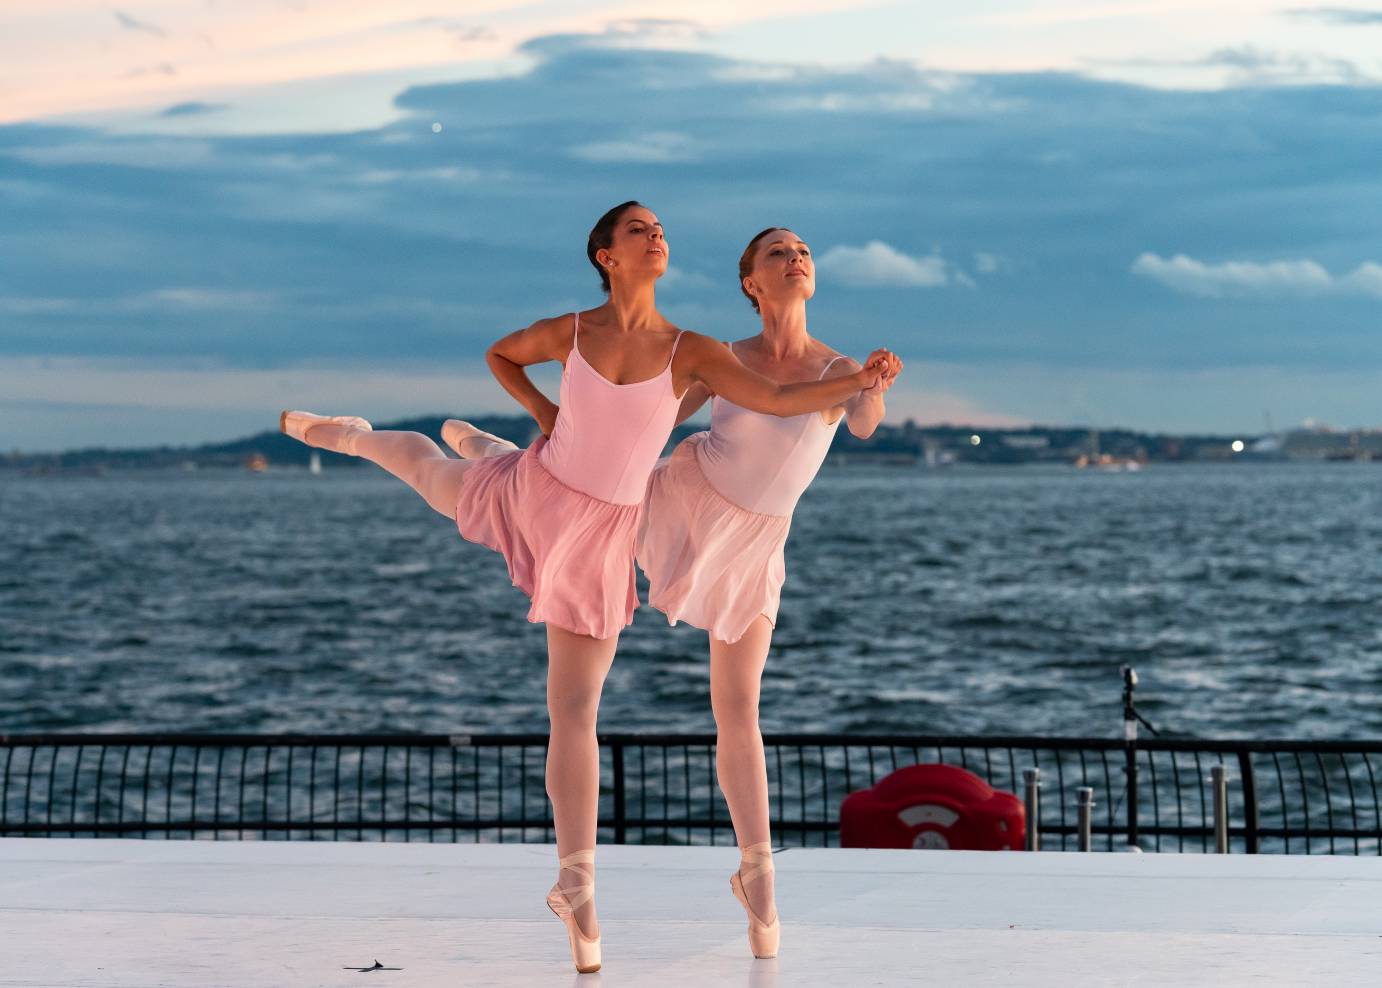 In pink leotards and chiffon skirts, Amanda Treiber and Giulia Farina stand in arabesque en pointe. Treiber is slightly behind Farina and holds her hand.